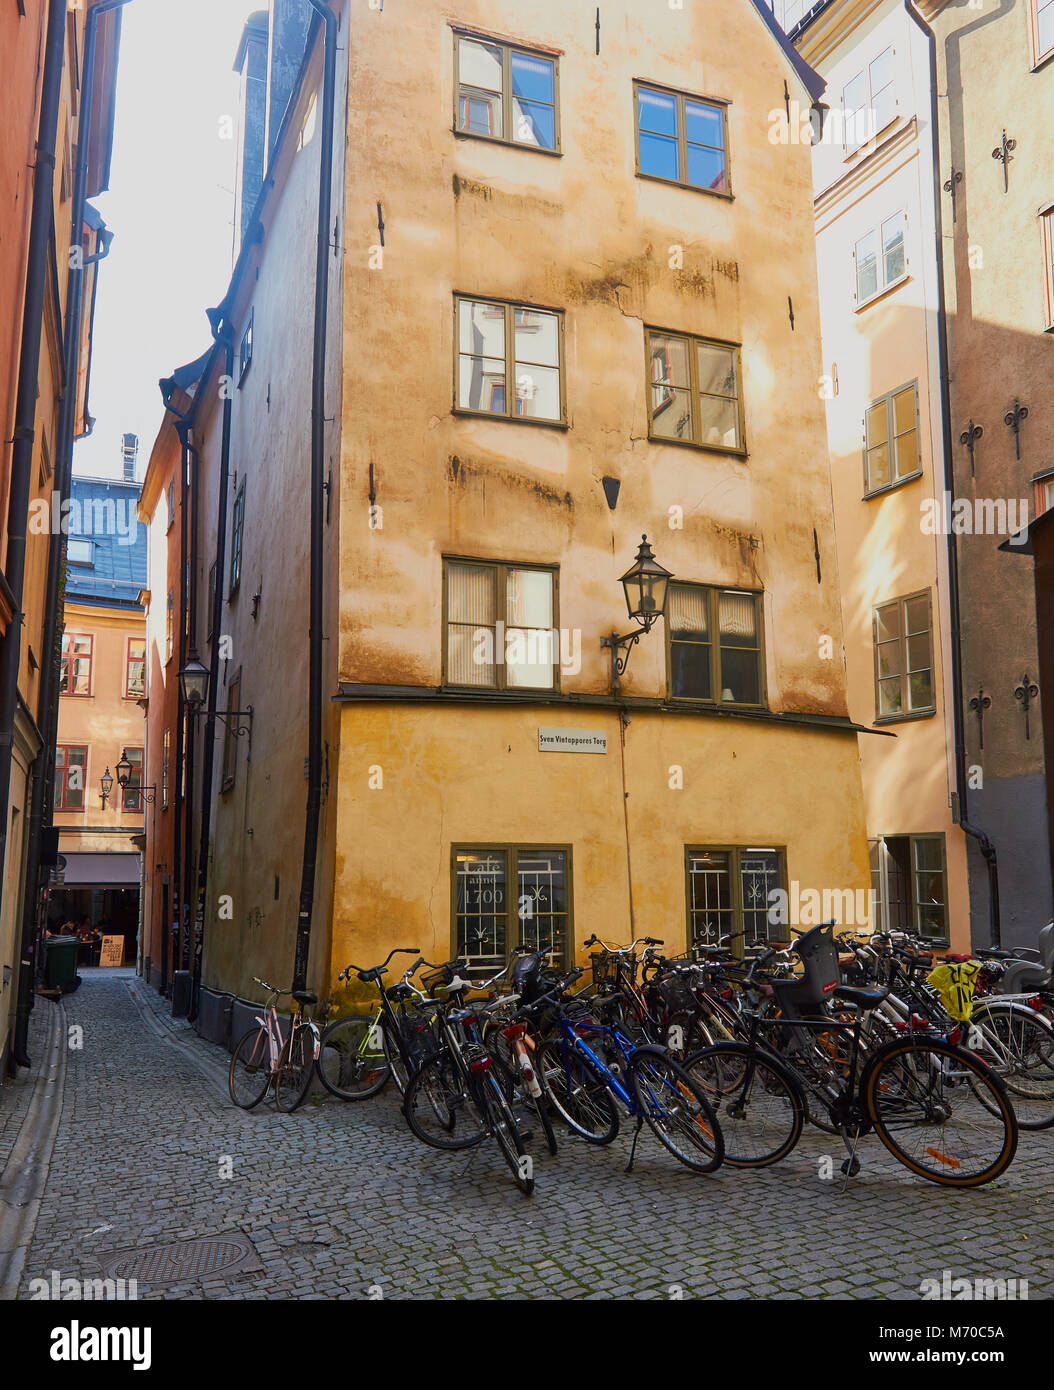 Sven Vintappares Torg, Gamla Stan, Stockholm, Sweden. The square was created in the 18th century as turning space for horse drawn vehicles in old town Stock Photo